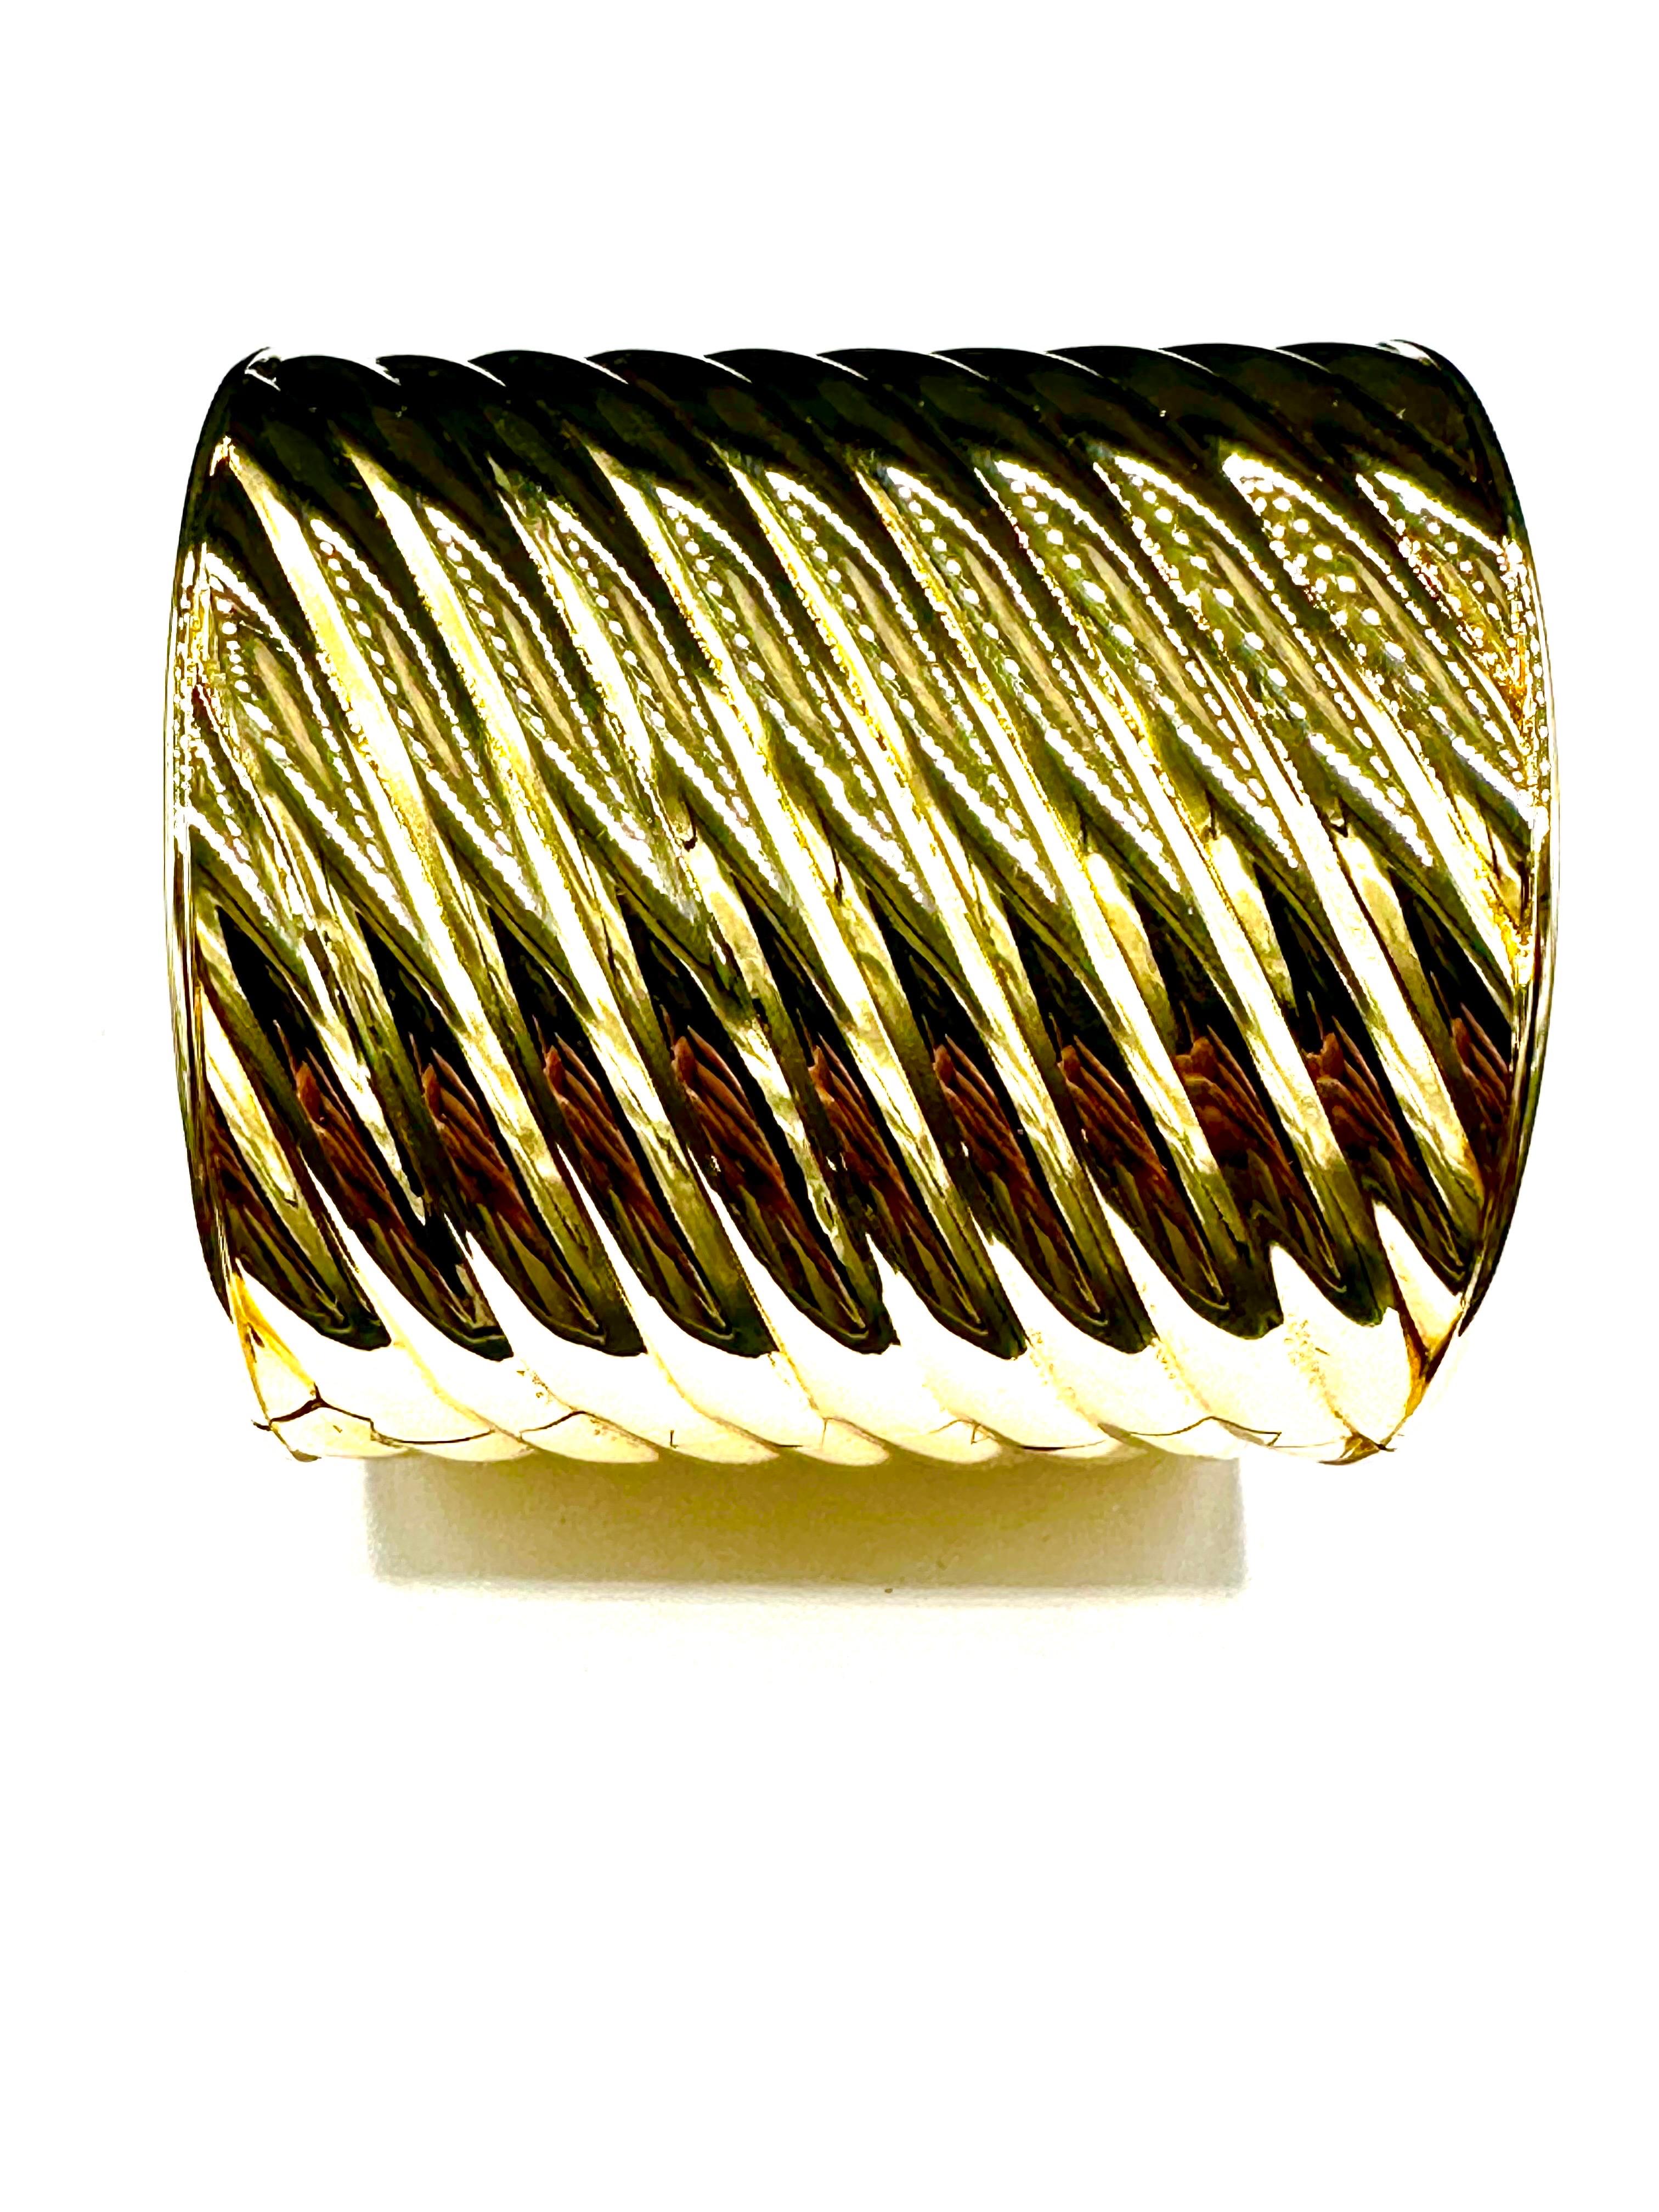 This is an amazing cuff bracelet!  This cuff is made in 18K yellow polished ribbed pattern gold.  It is 2.75 inches at the top, tapering to 2.10 inches at the bottom.  The bracelet is spring hinged on both sides for ease of slipping on.  This will